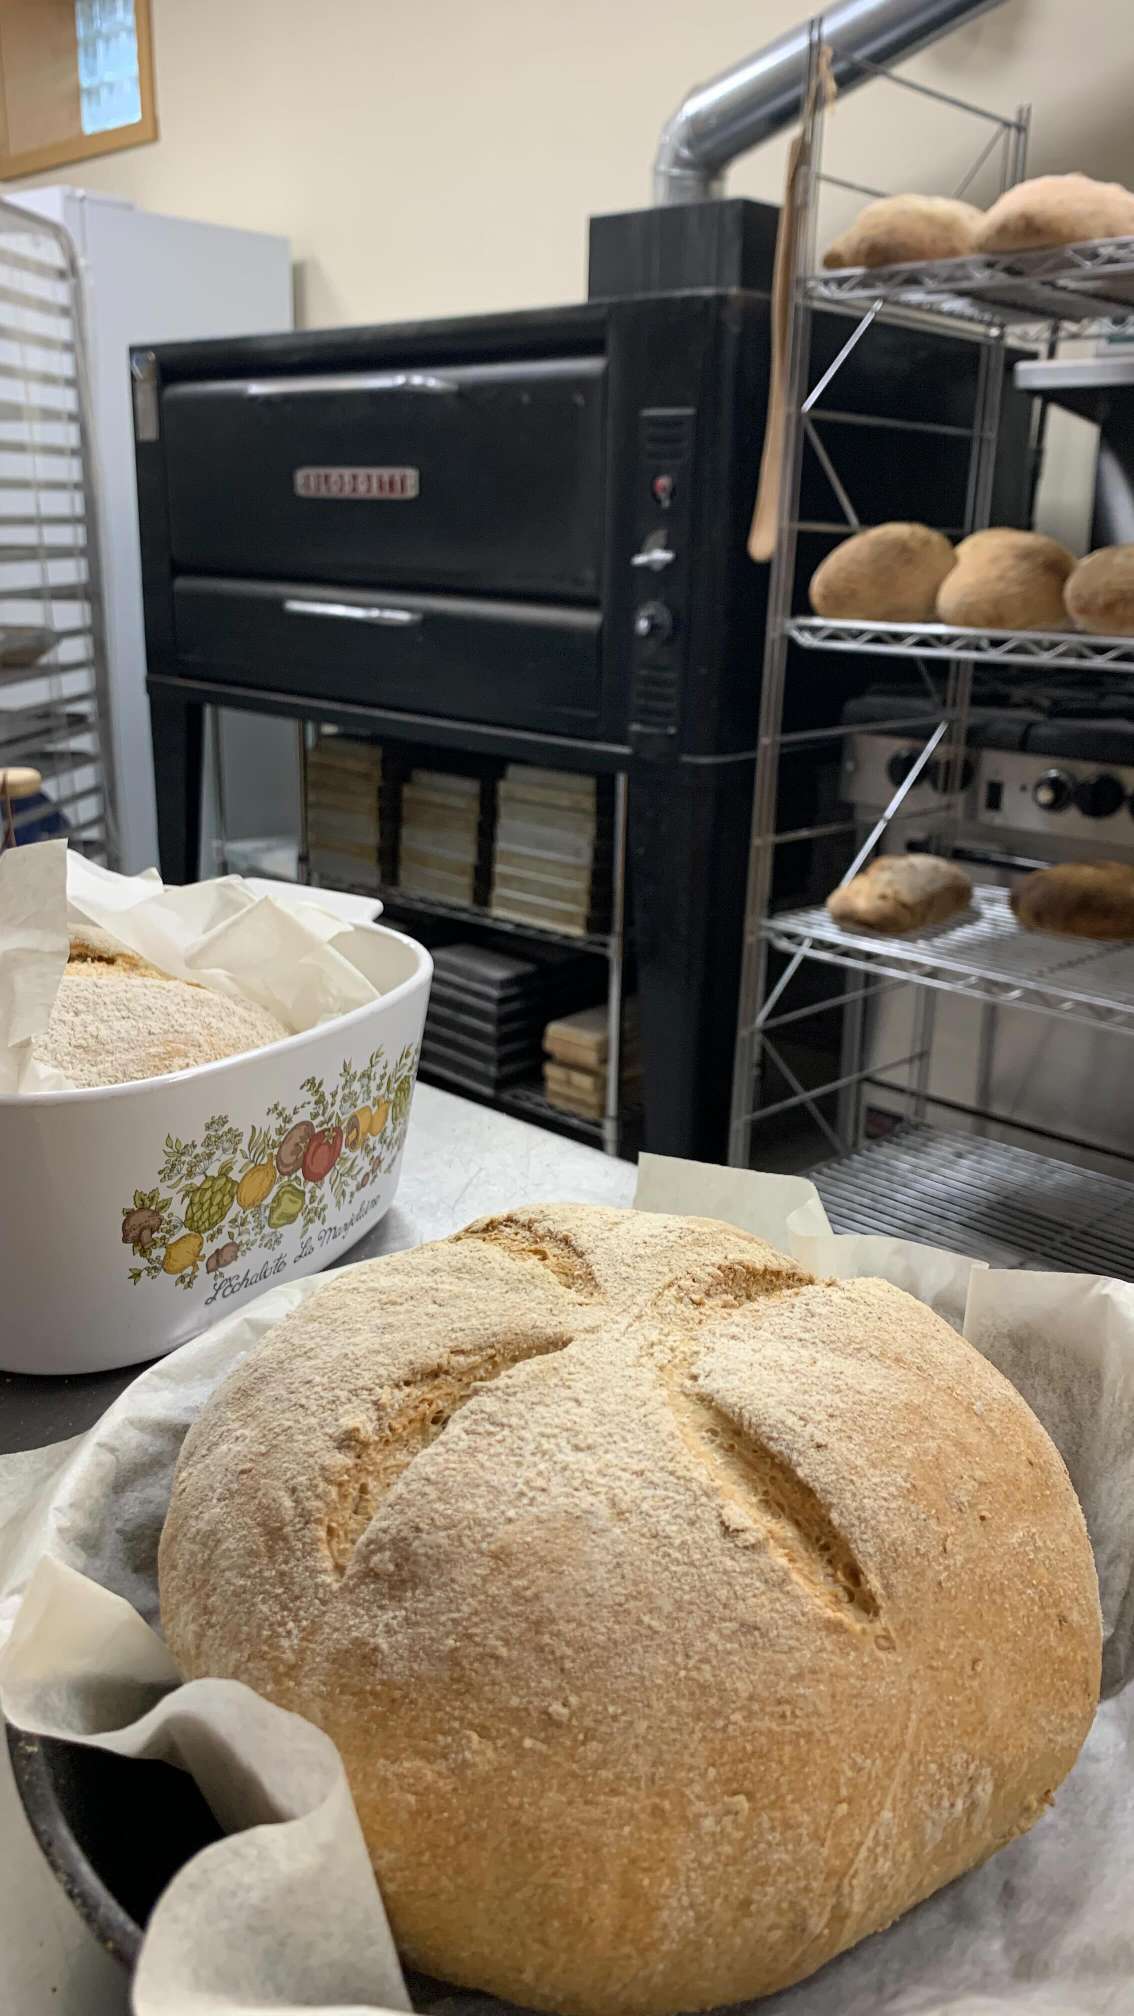 Father Paul, @orabreads, took time out of his busy schedule to teach some eager missionaries how to bake bread! 

What a fun day for everyone involved! ð©ð¼‍ð³✨ð